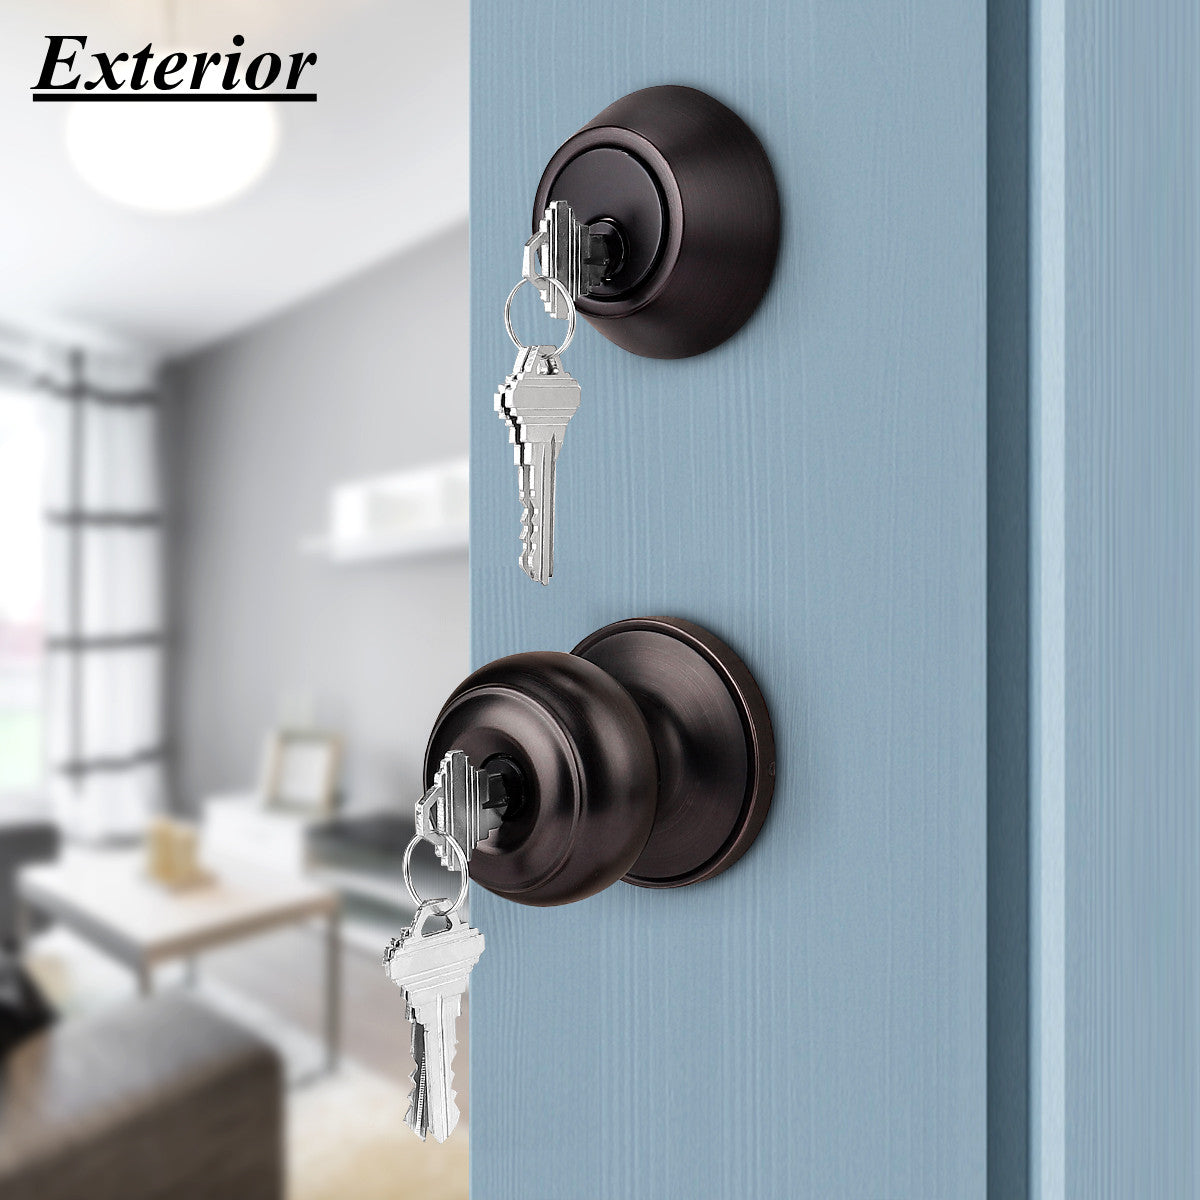 Door locks and options - even more to think about!